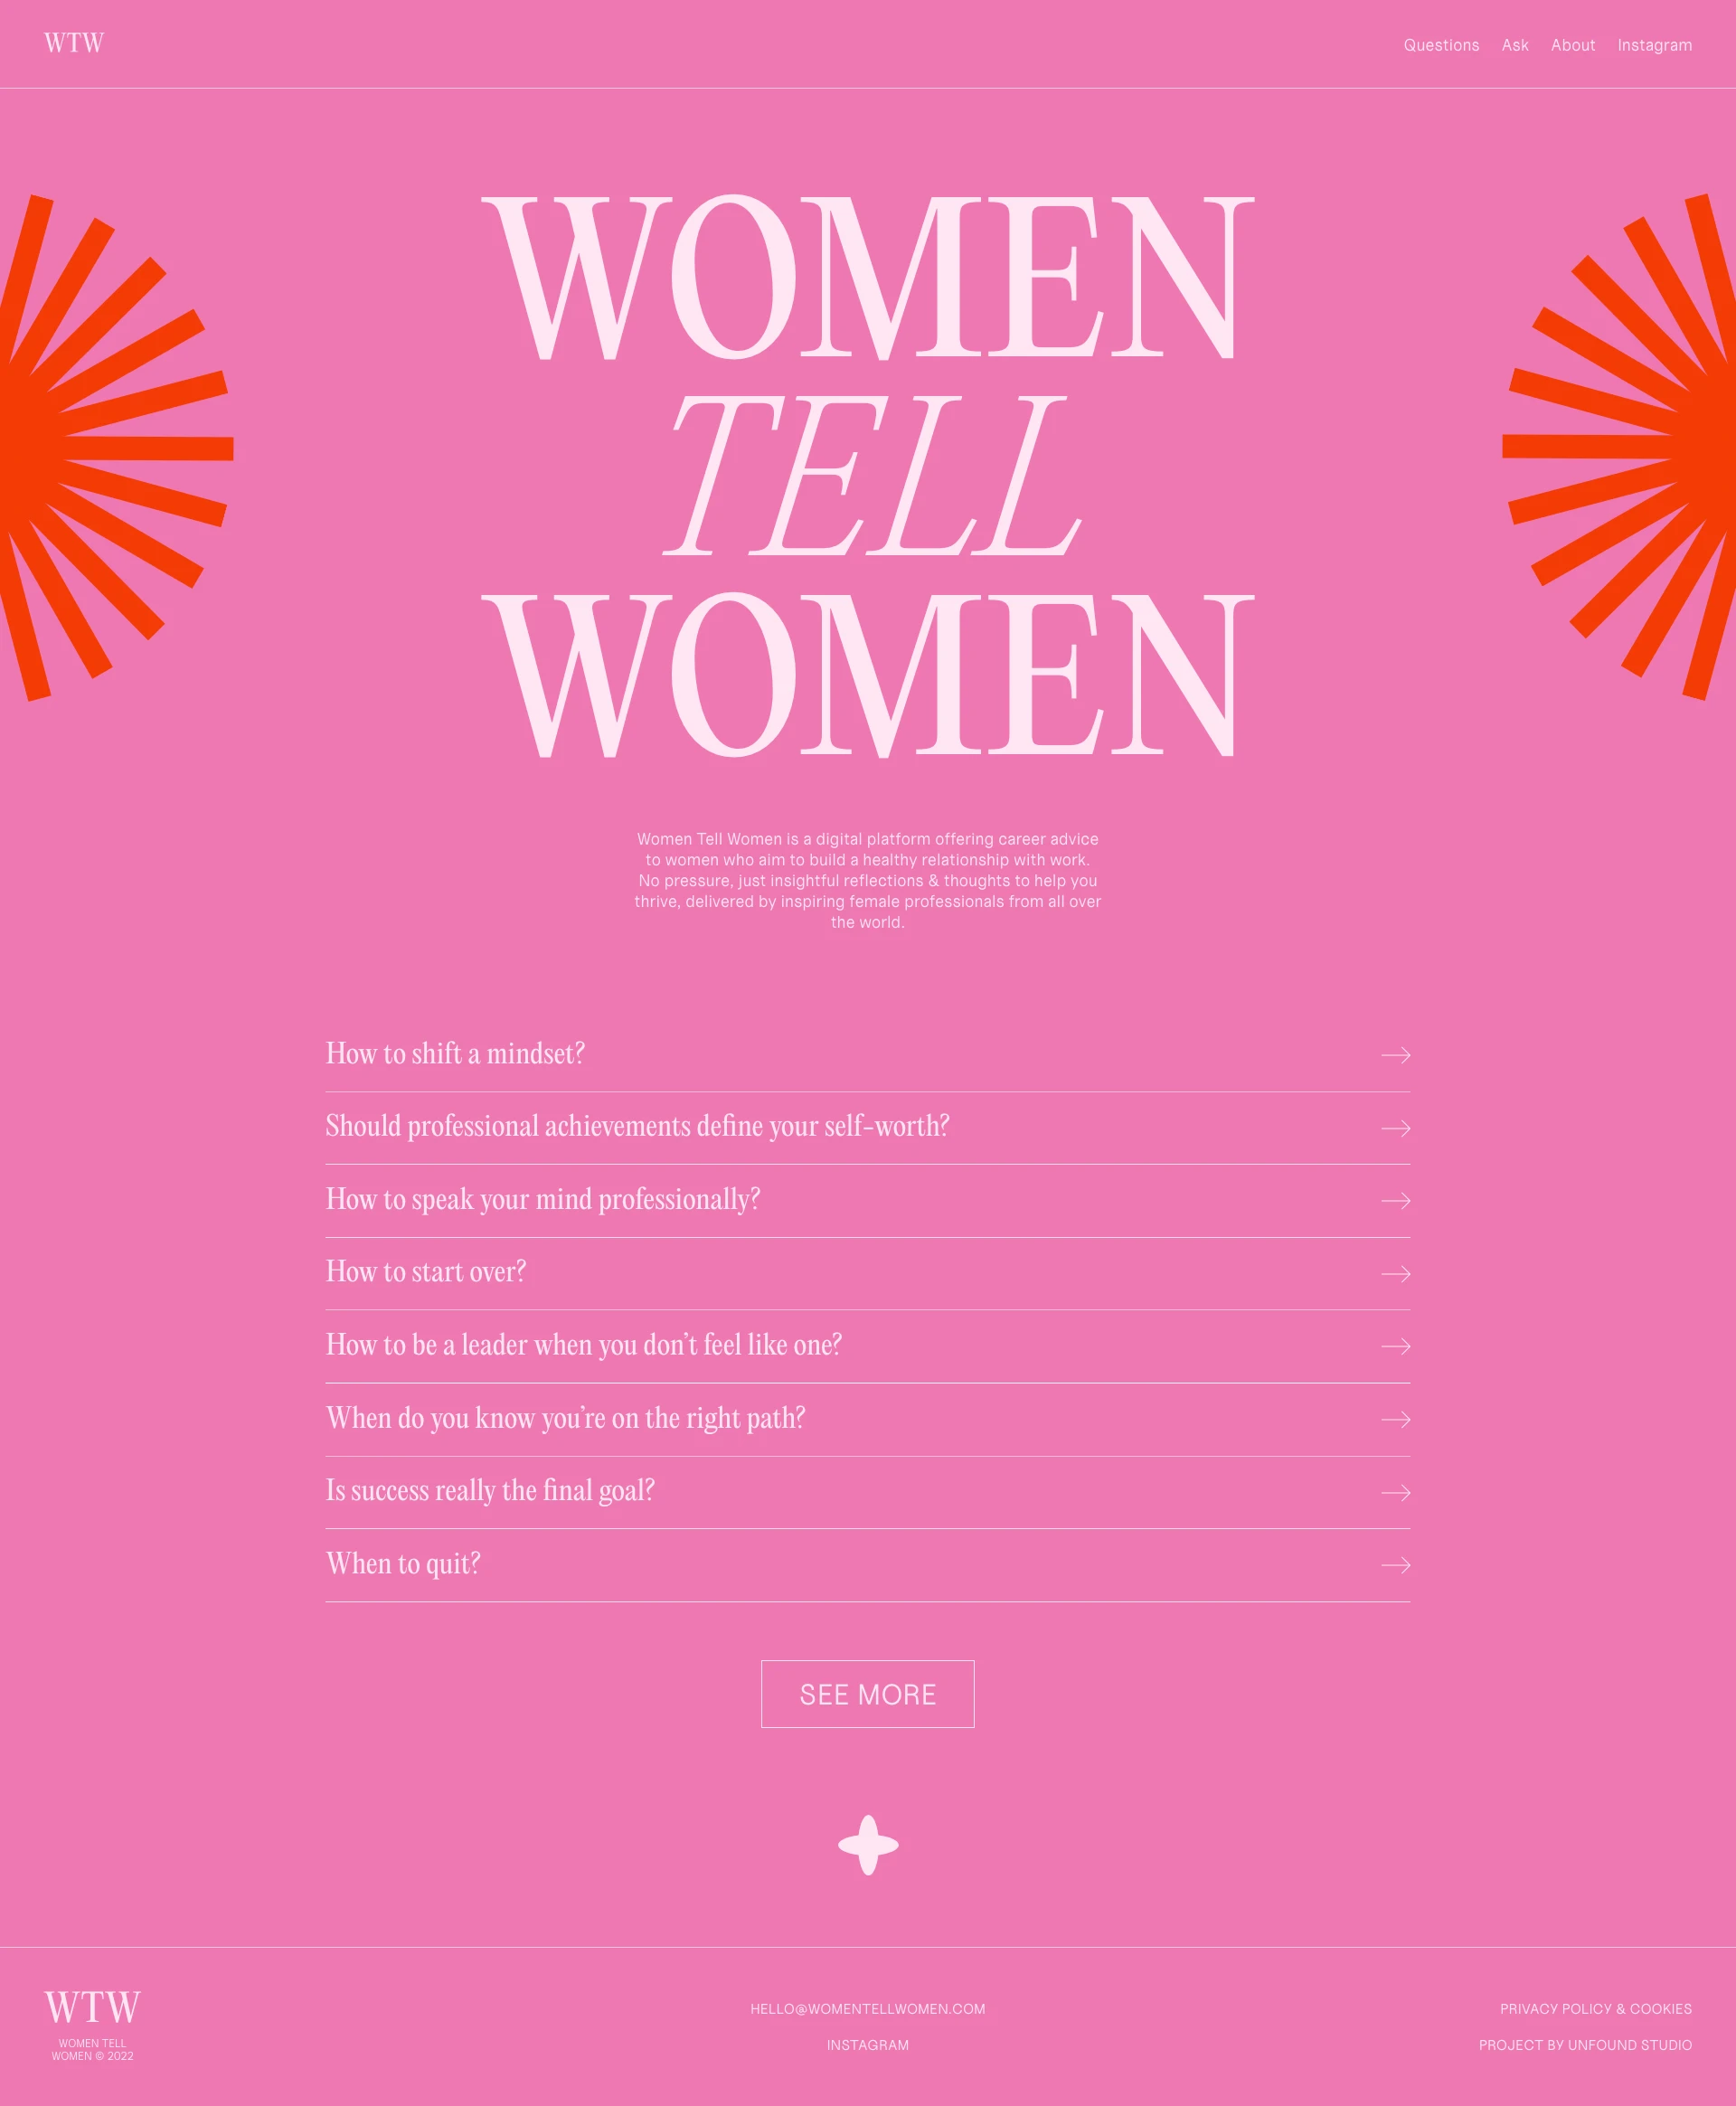 Women Tell Women Landing Page Example: Women Tell Women is a digital platform featuring pressure-free career advice to women who strive to build a healthy relationship with work. Discover career questions answered by female professionals from all over the world.